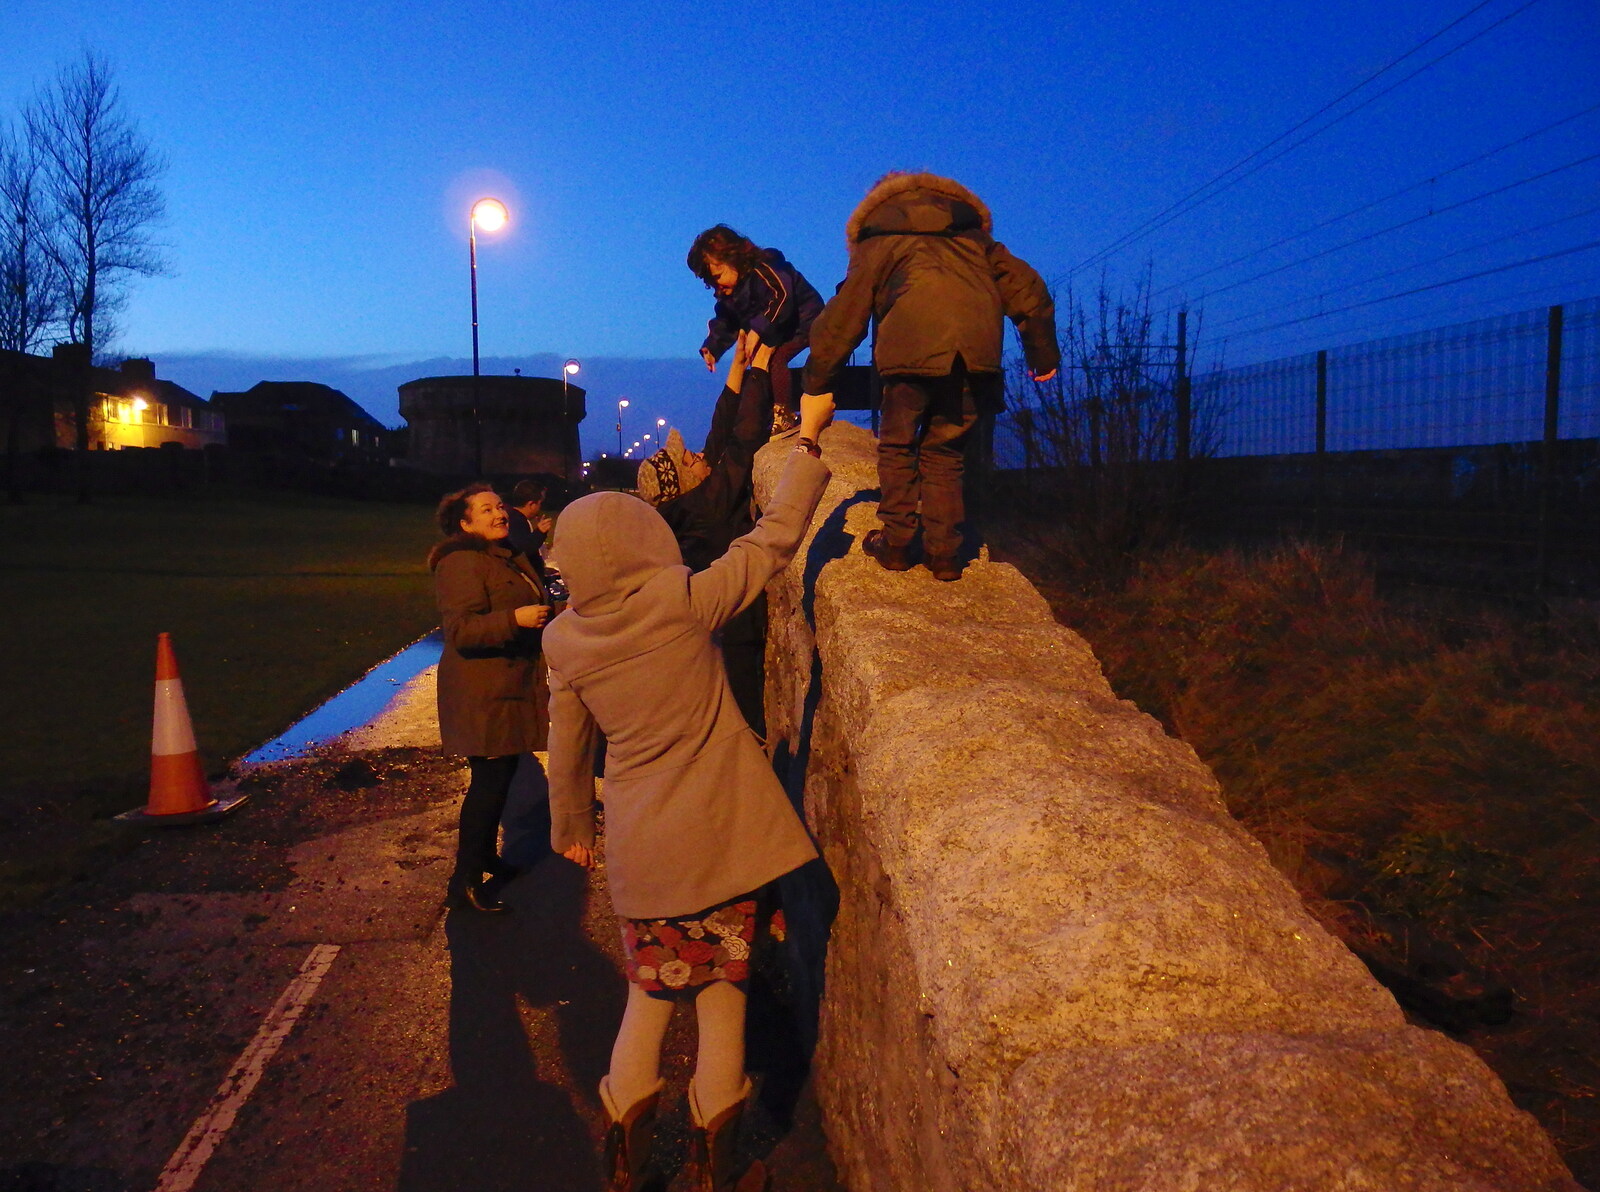 Fred climbs a wall from Dun Laoghaire and an Electrical Disaster, Monkstown, County Dublin, Ireland - 4th January 2014